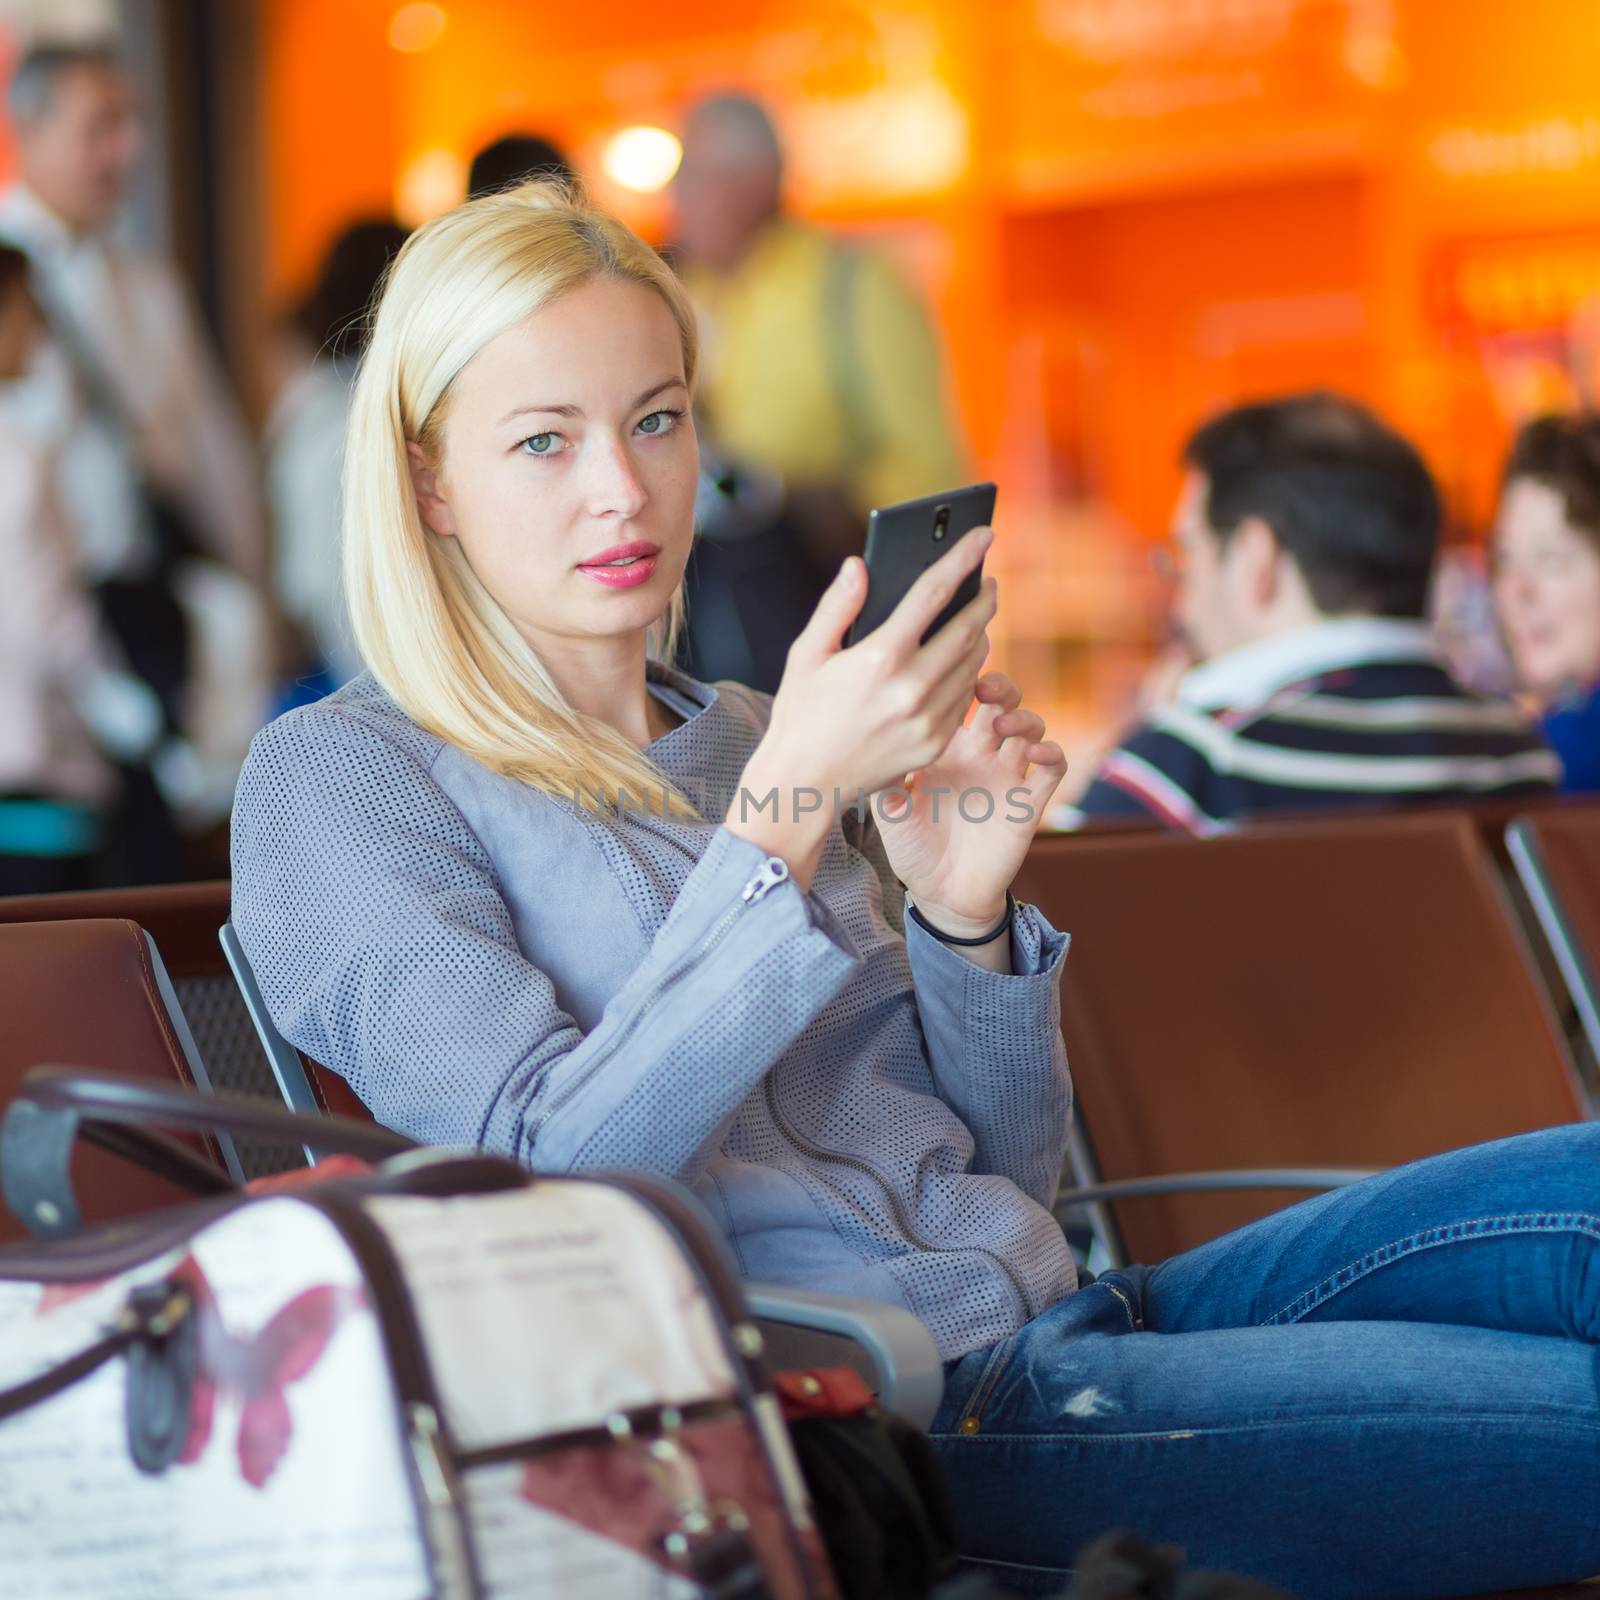 Female traveler using cell phone while waiting. by kasto